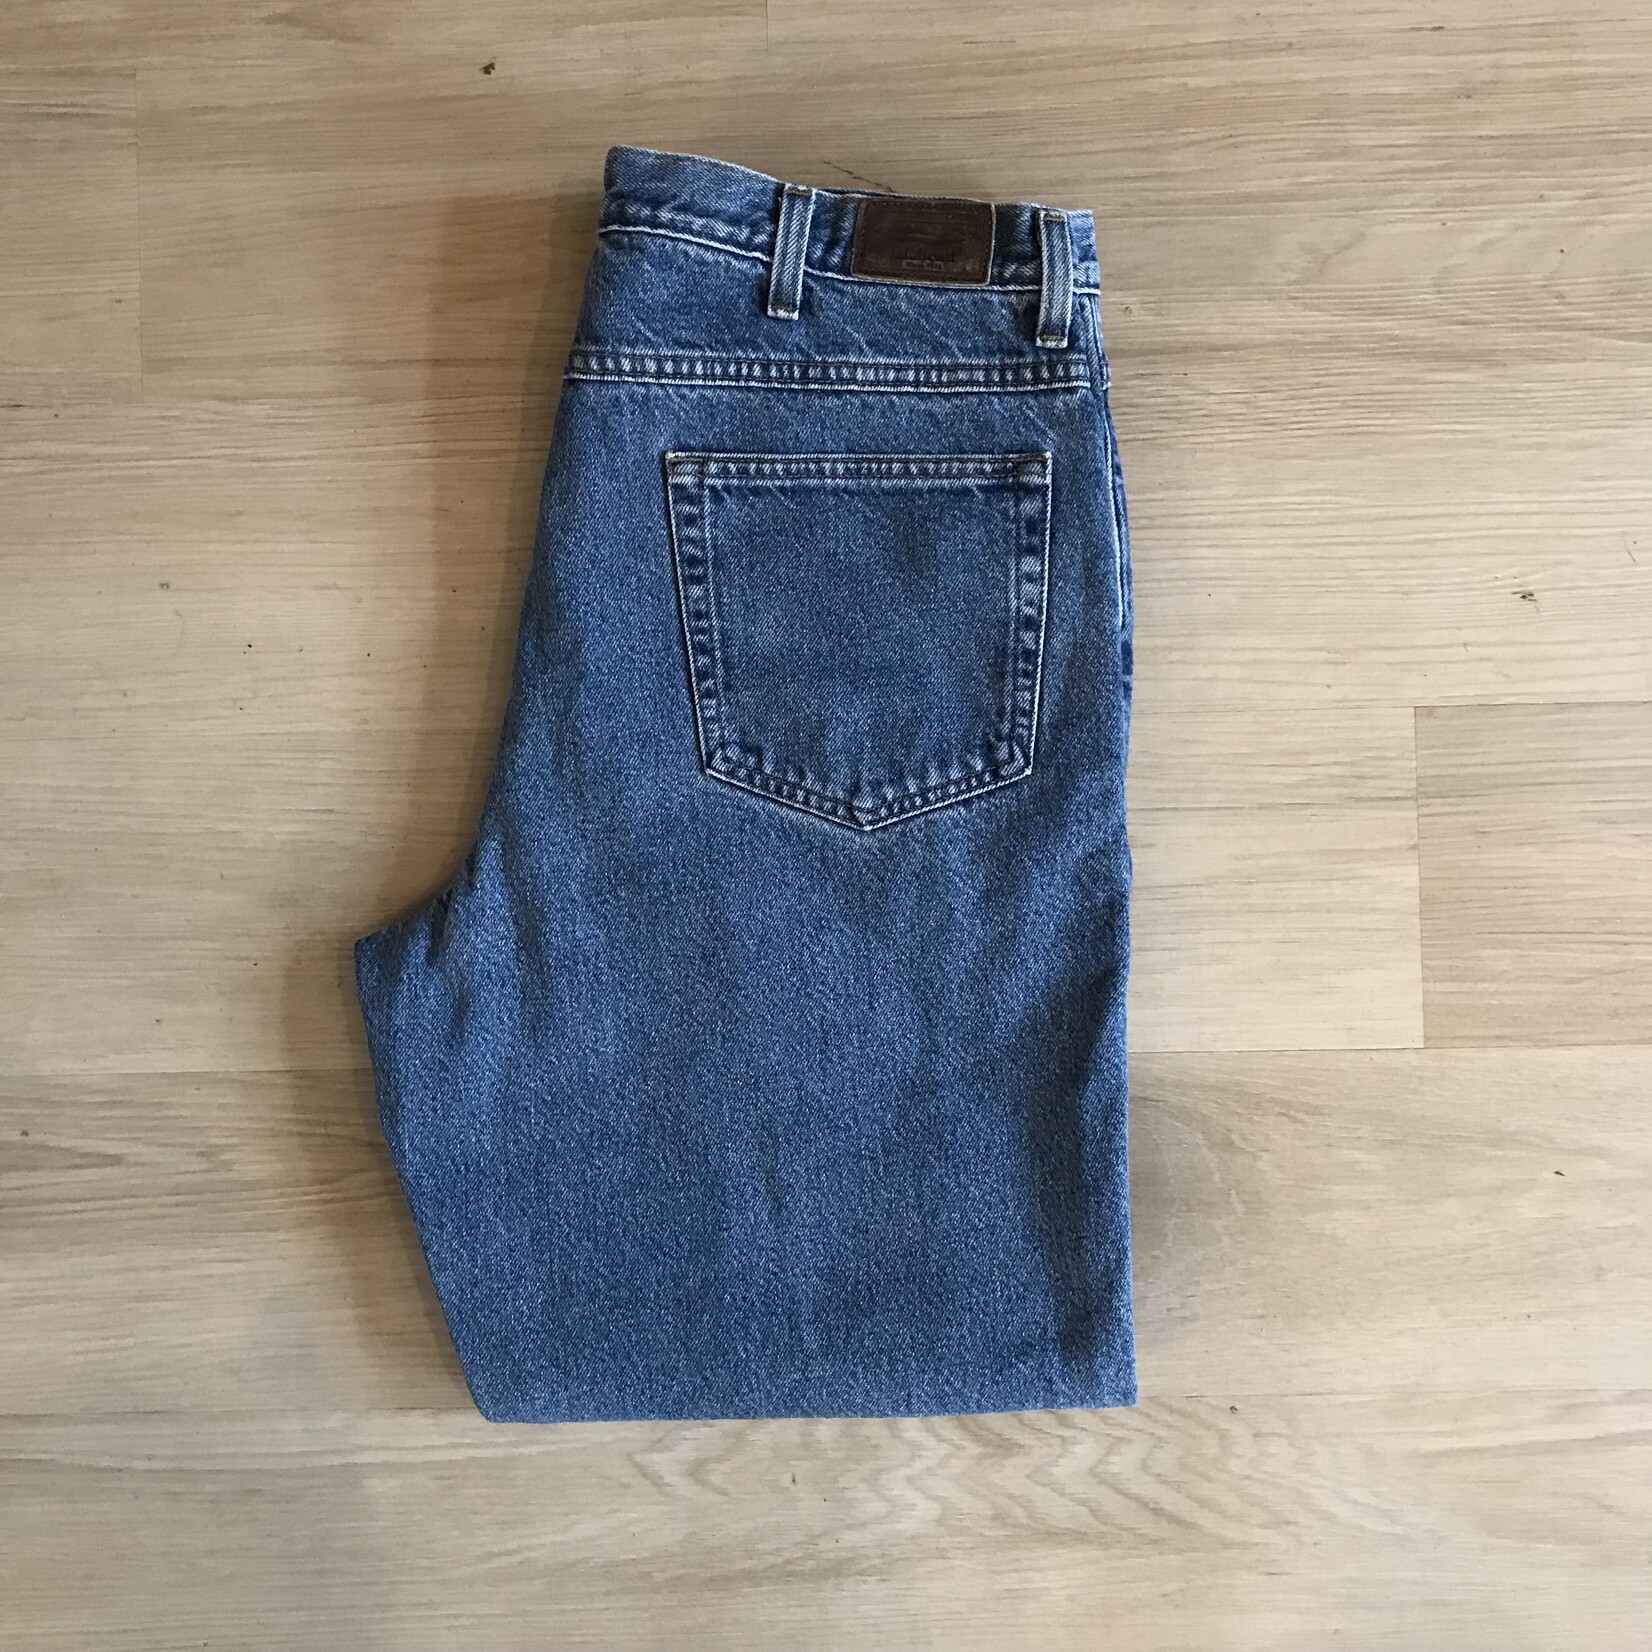 12095 ll bean flannel-lined jeans sz 35 x 29 - Selective